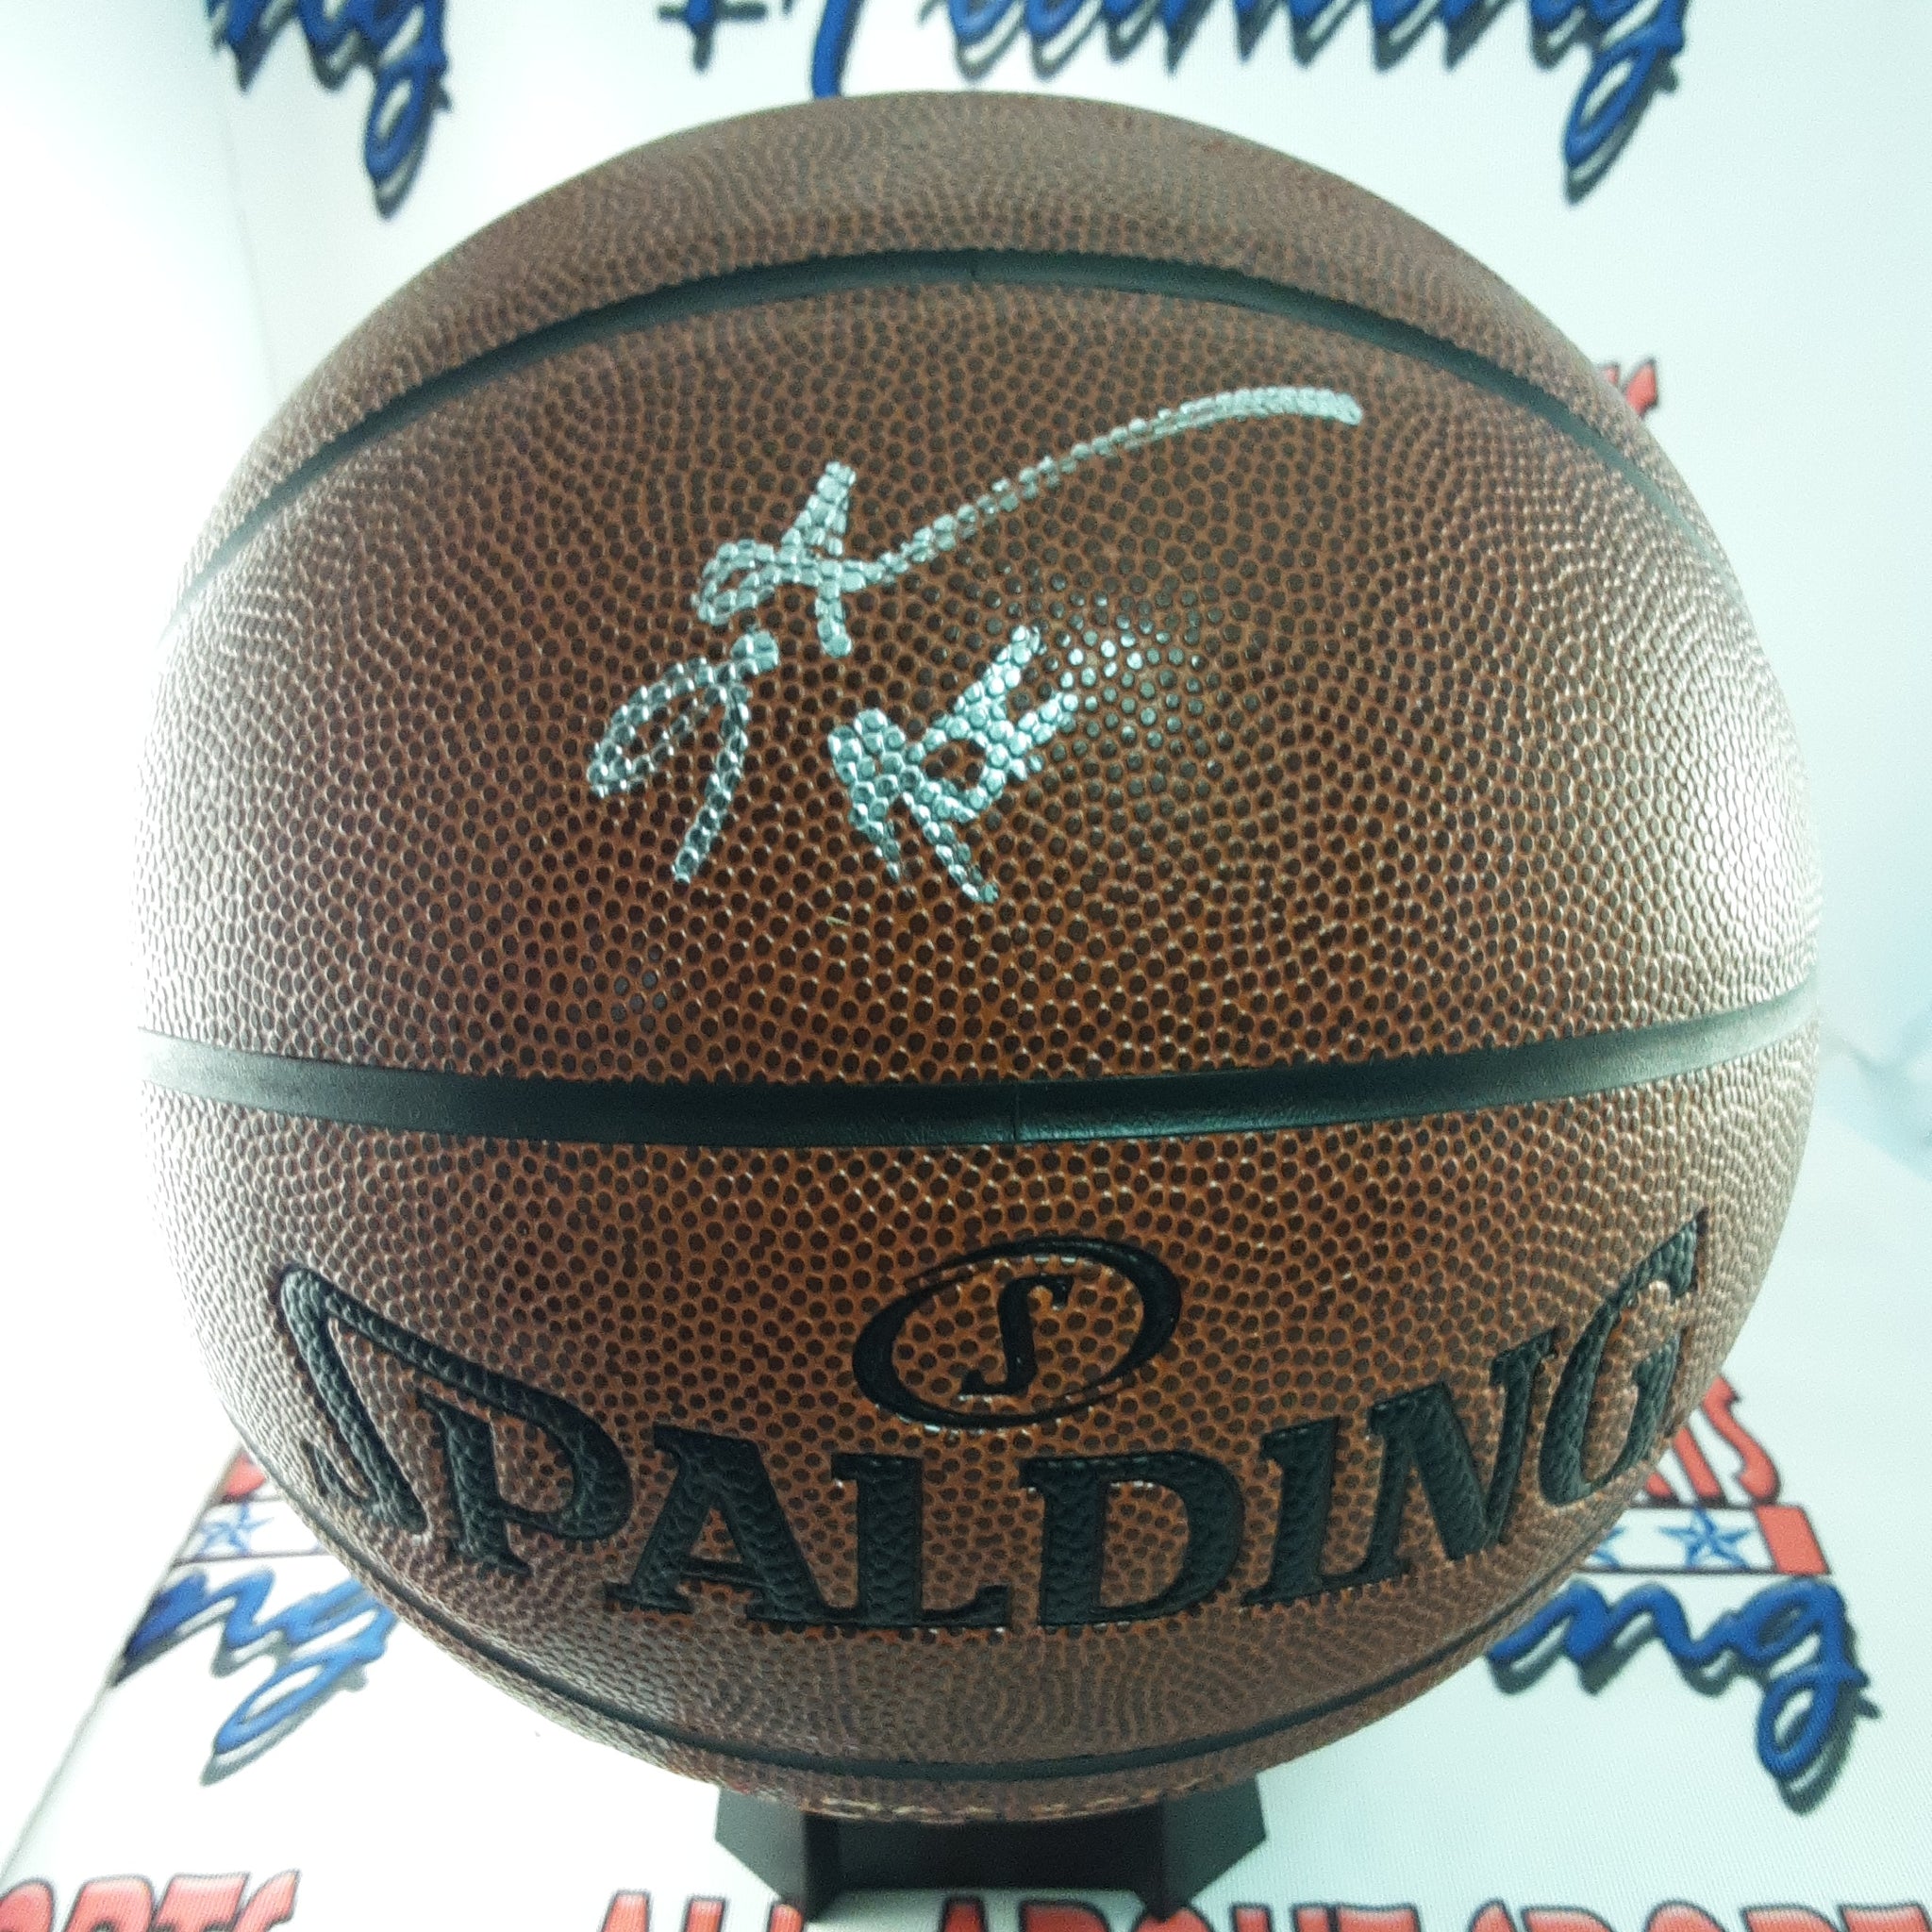 Allen Iverson Authentic Signed Hall of Fame Basketball Autographed JSA